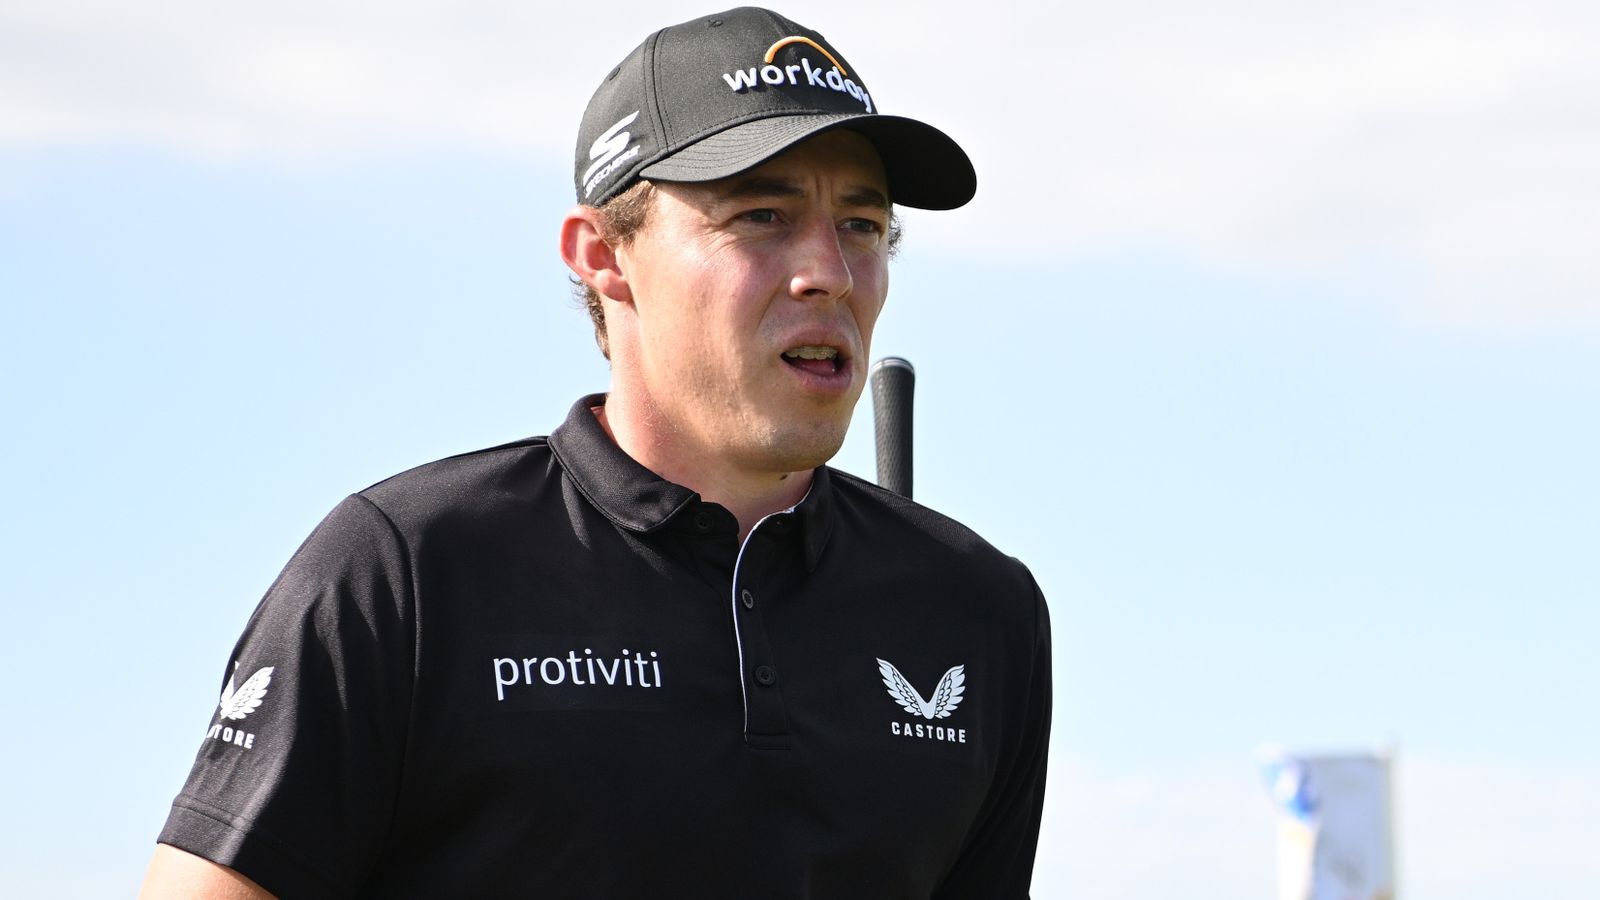 Italian Open: Matt Fitzpatrick leads by one going into final day at the Marco Simone Golf and Country Club